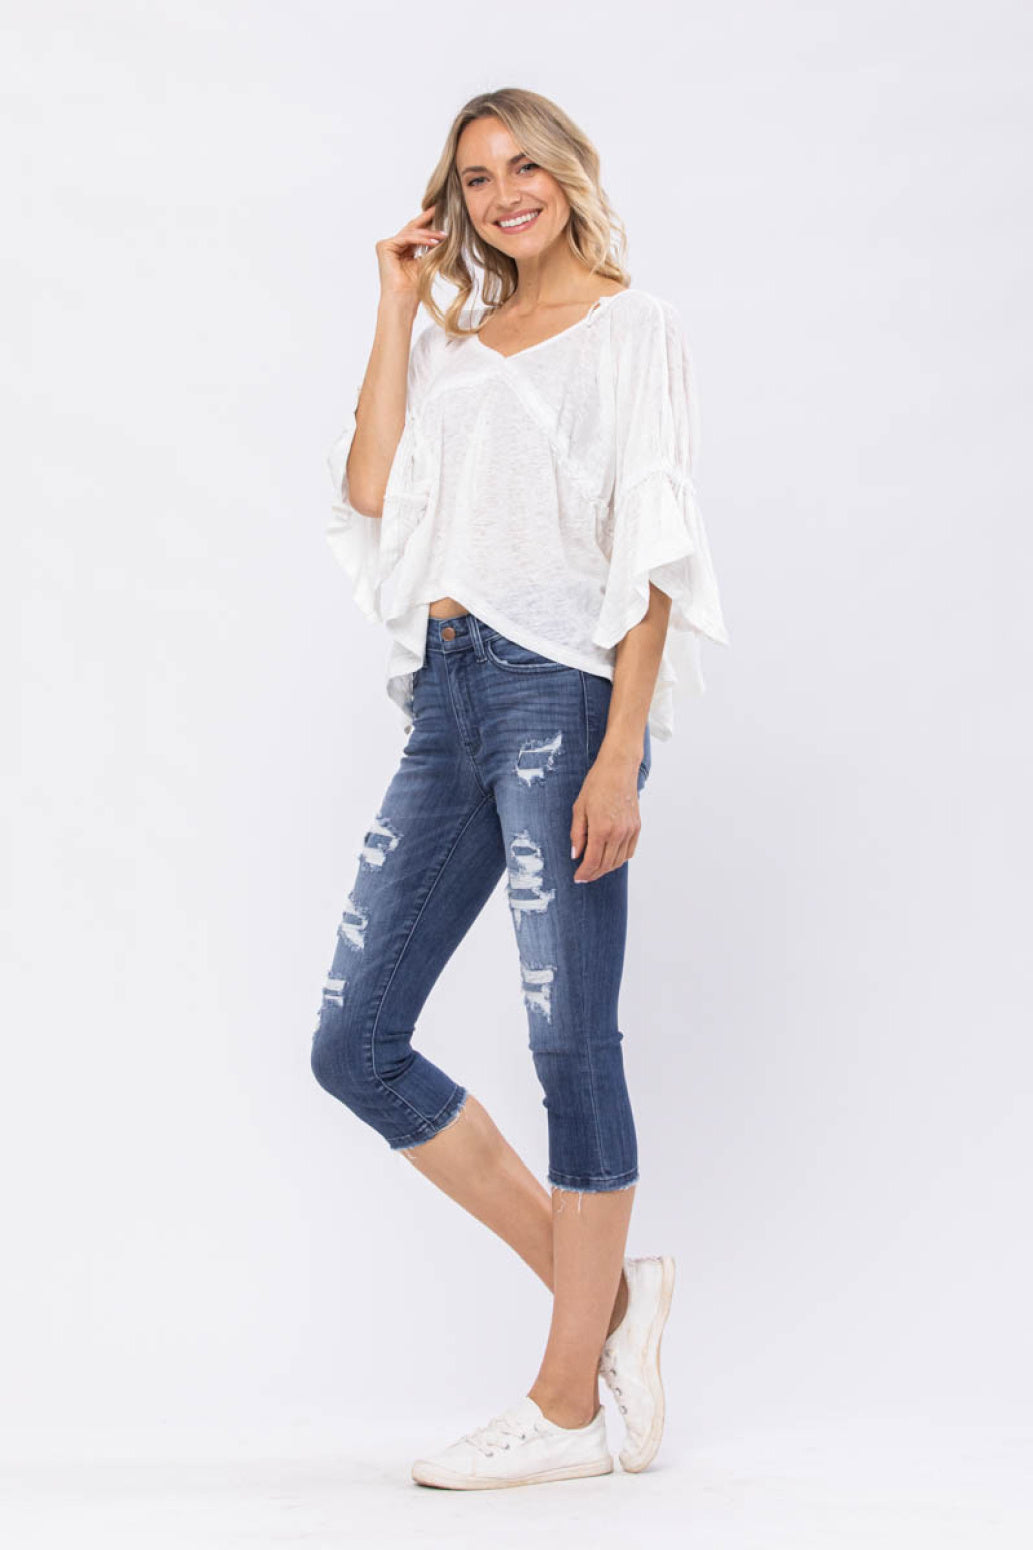 Judy Blue Contrast Patch Mid-Rise Skinny Capris Style 82271